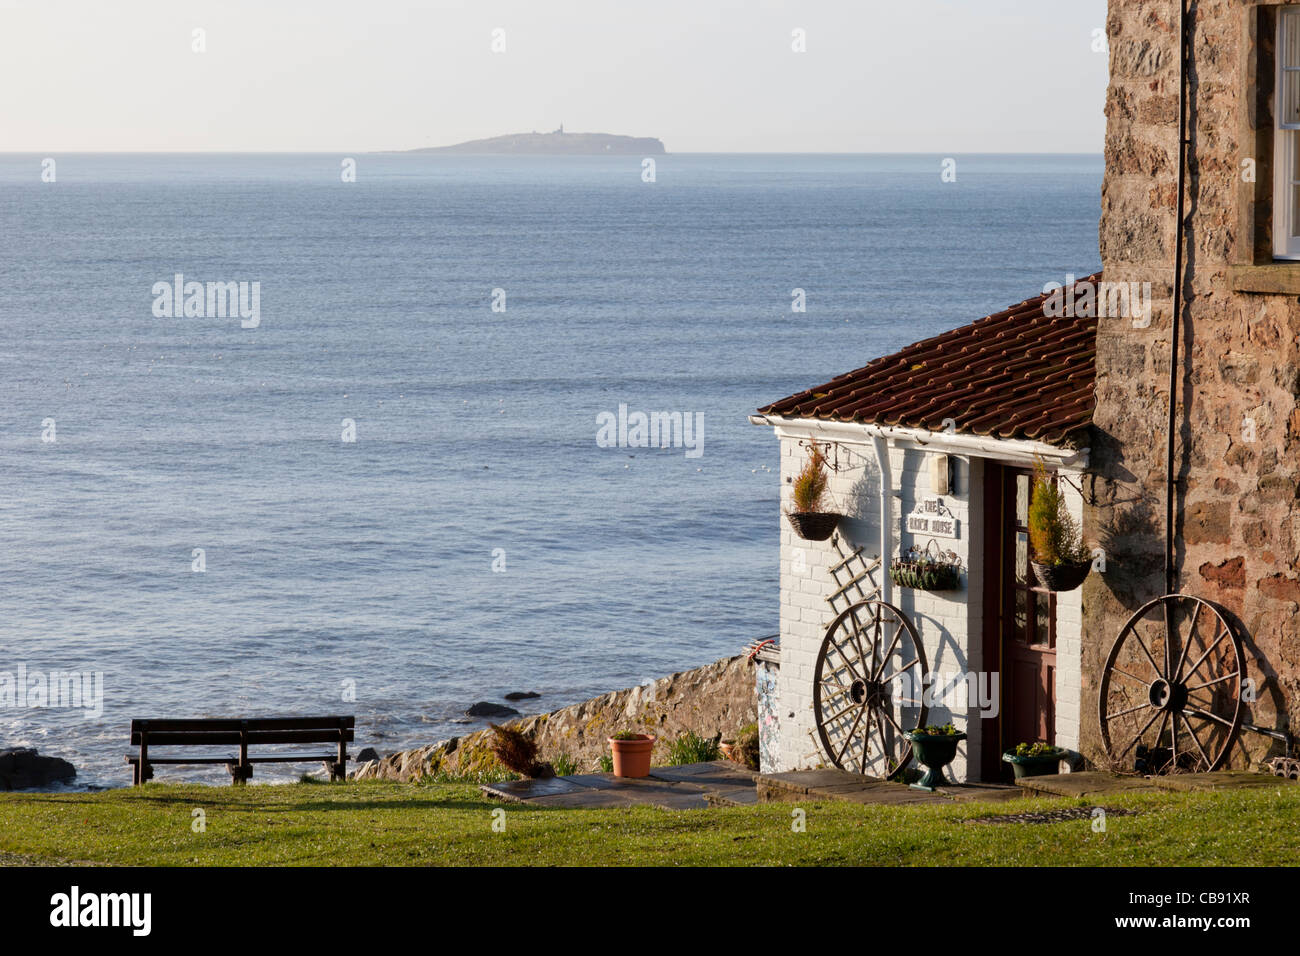 The Watch House, Crail, East Neuk of Fife, Scotland Stock Photo